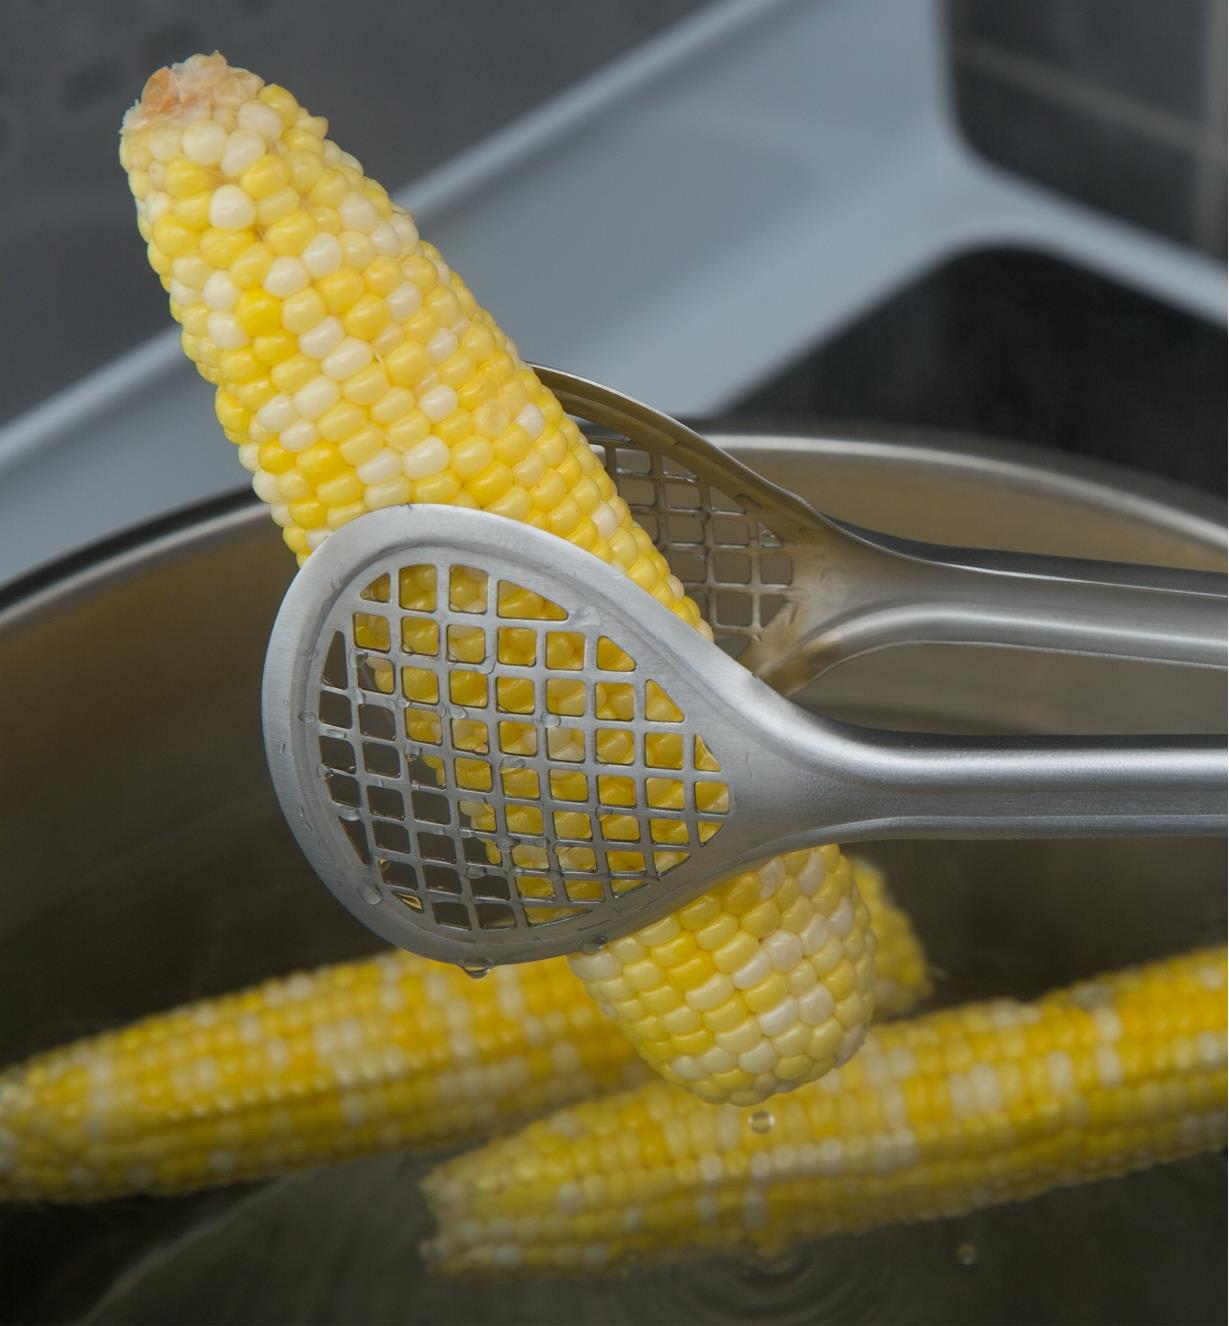 Using Grill Fry Tongs to remove a cob of corn from a pot of water